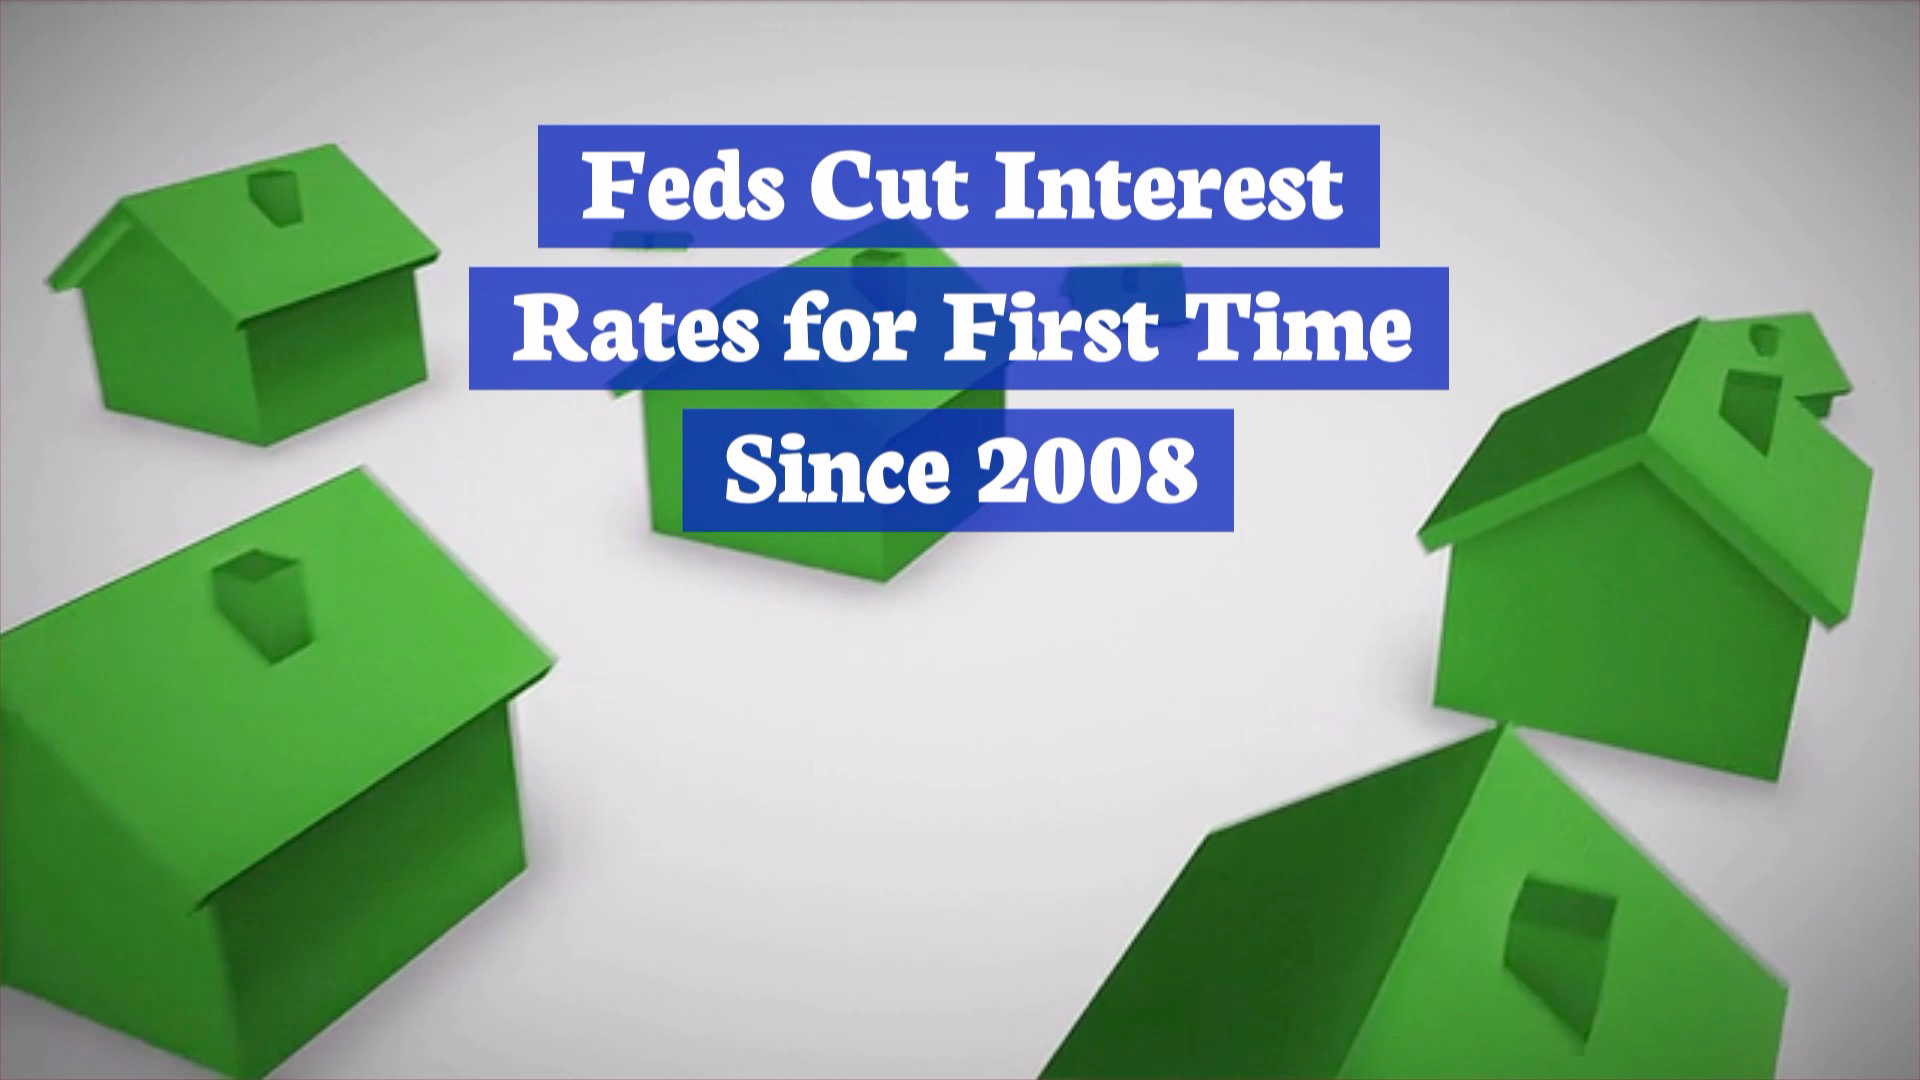 The Federal Reserve Cuts Interest Rates